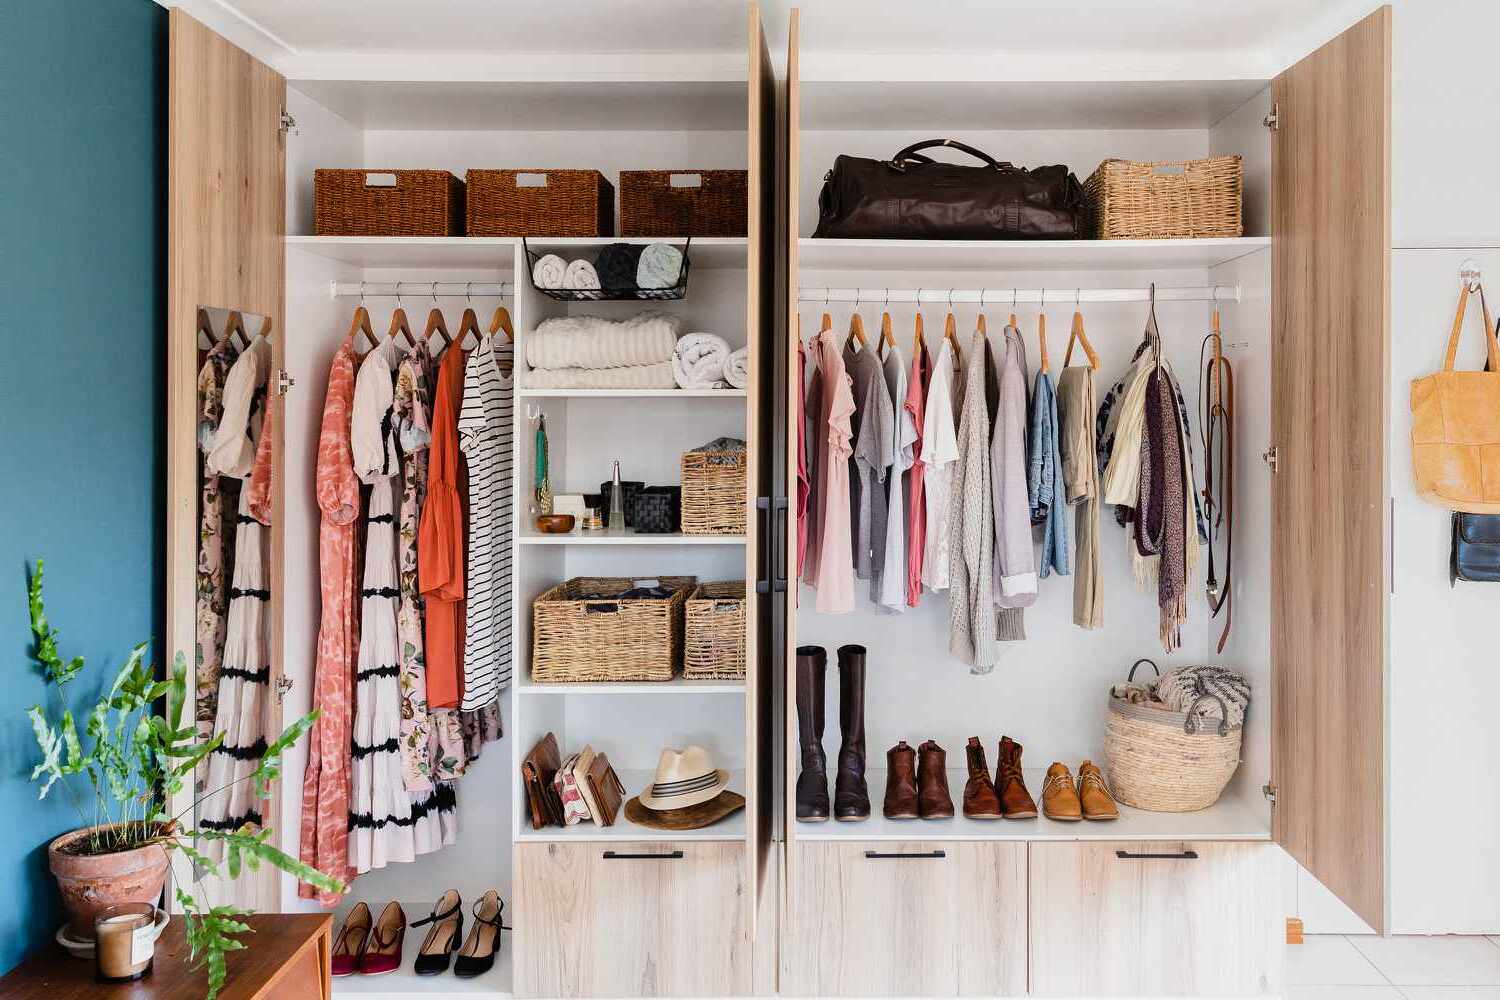 DIY Closet Shelves: Organize Your Space With These Simple Steps